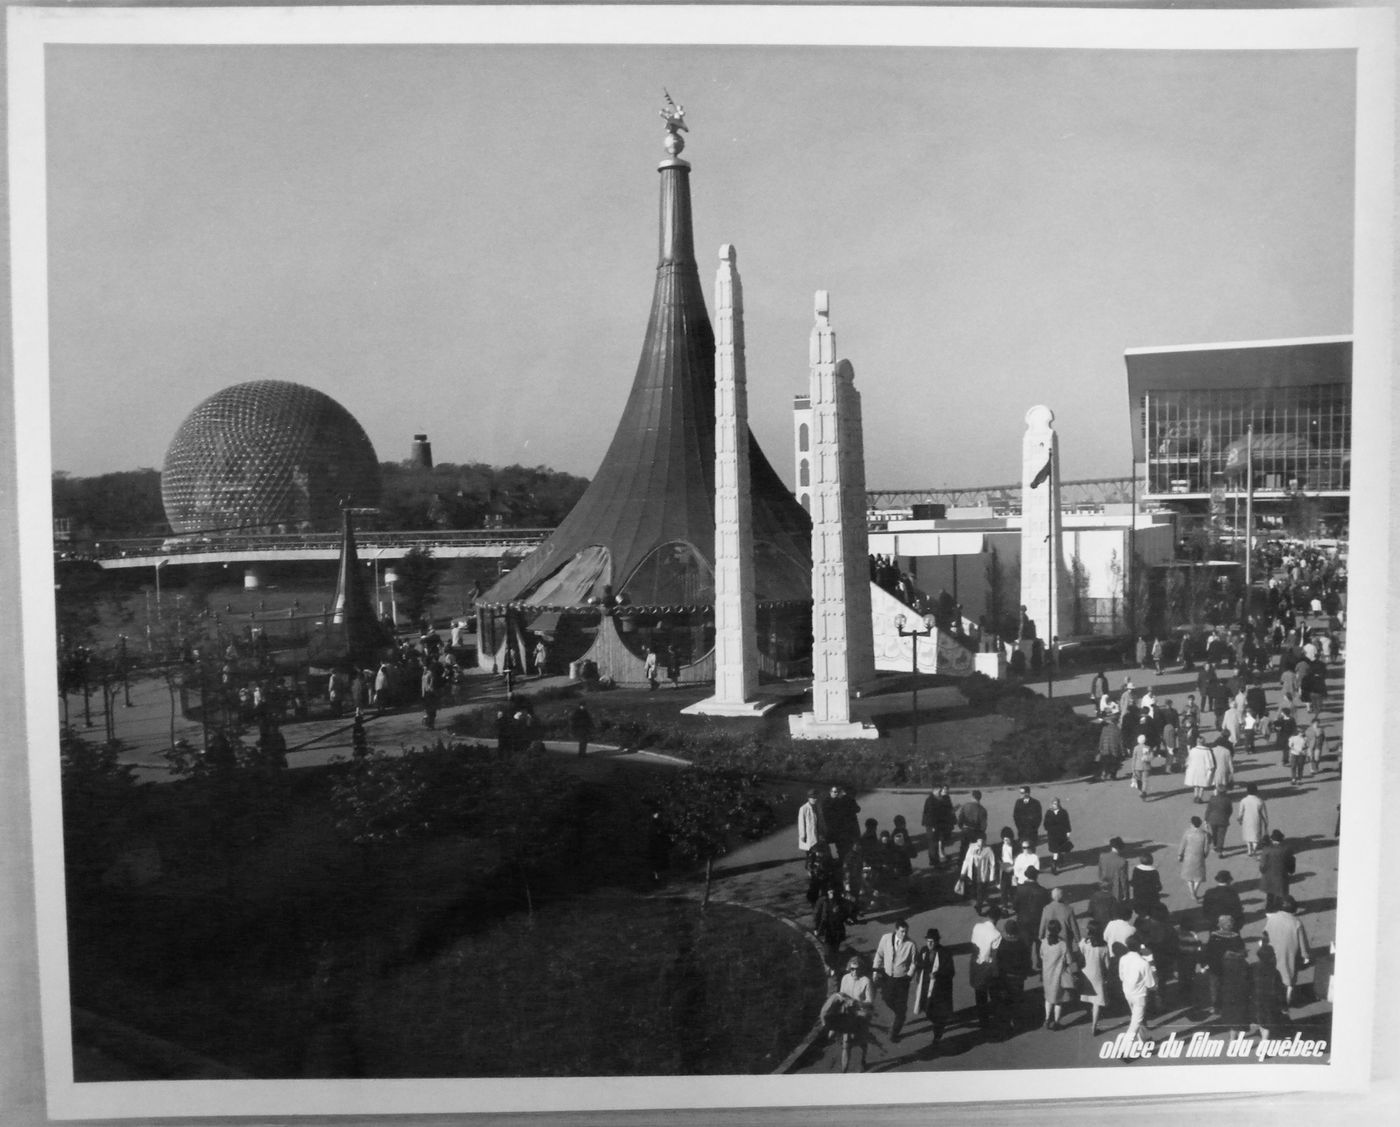 View of the Pavilion of Ethiopia with the Pavilions of the United States and of the Soviet Union in background, Expo 67, Montréal, Québec